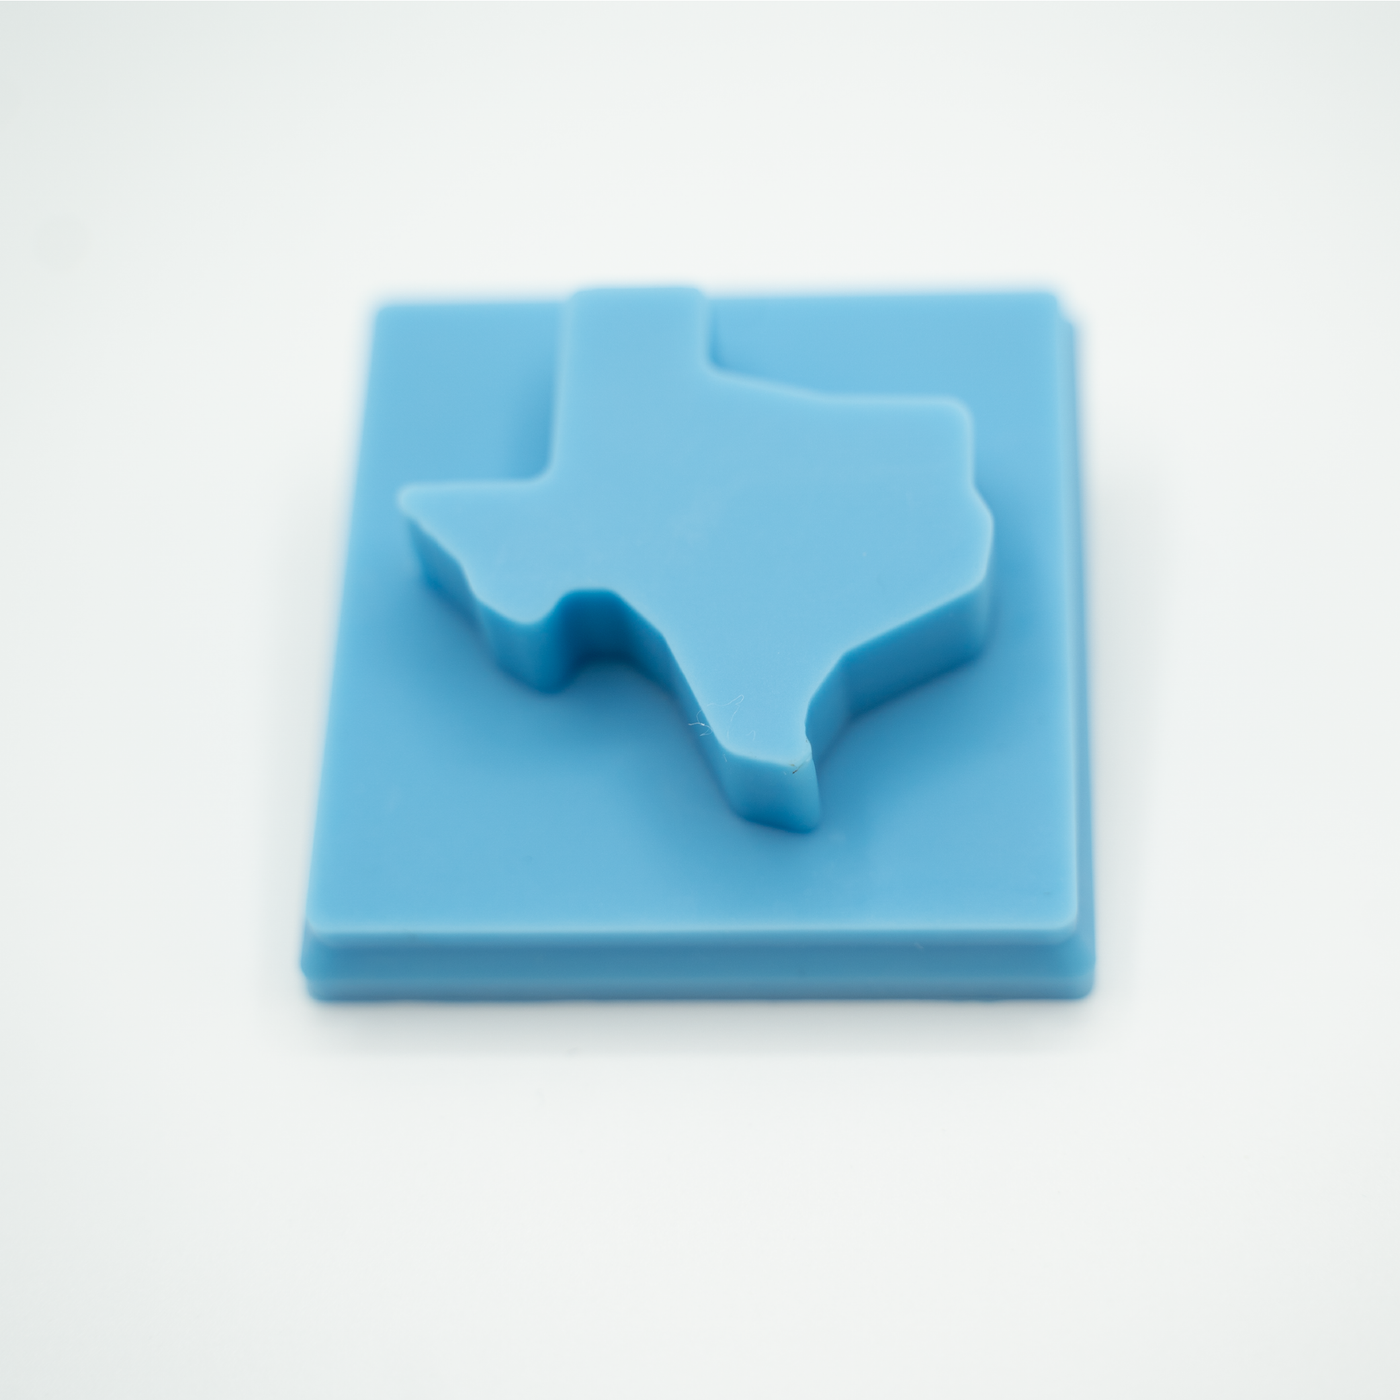 Texas Inserts - 3 Pack